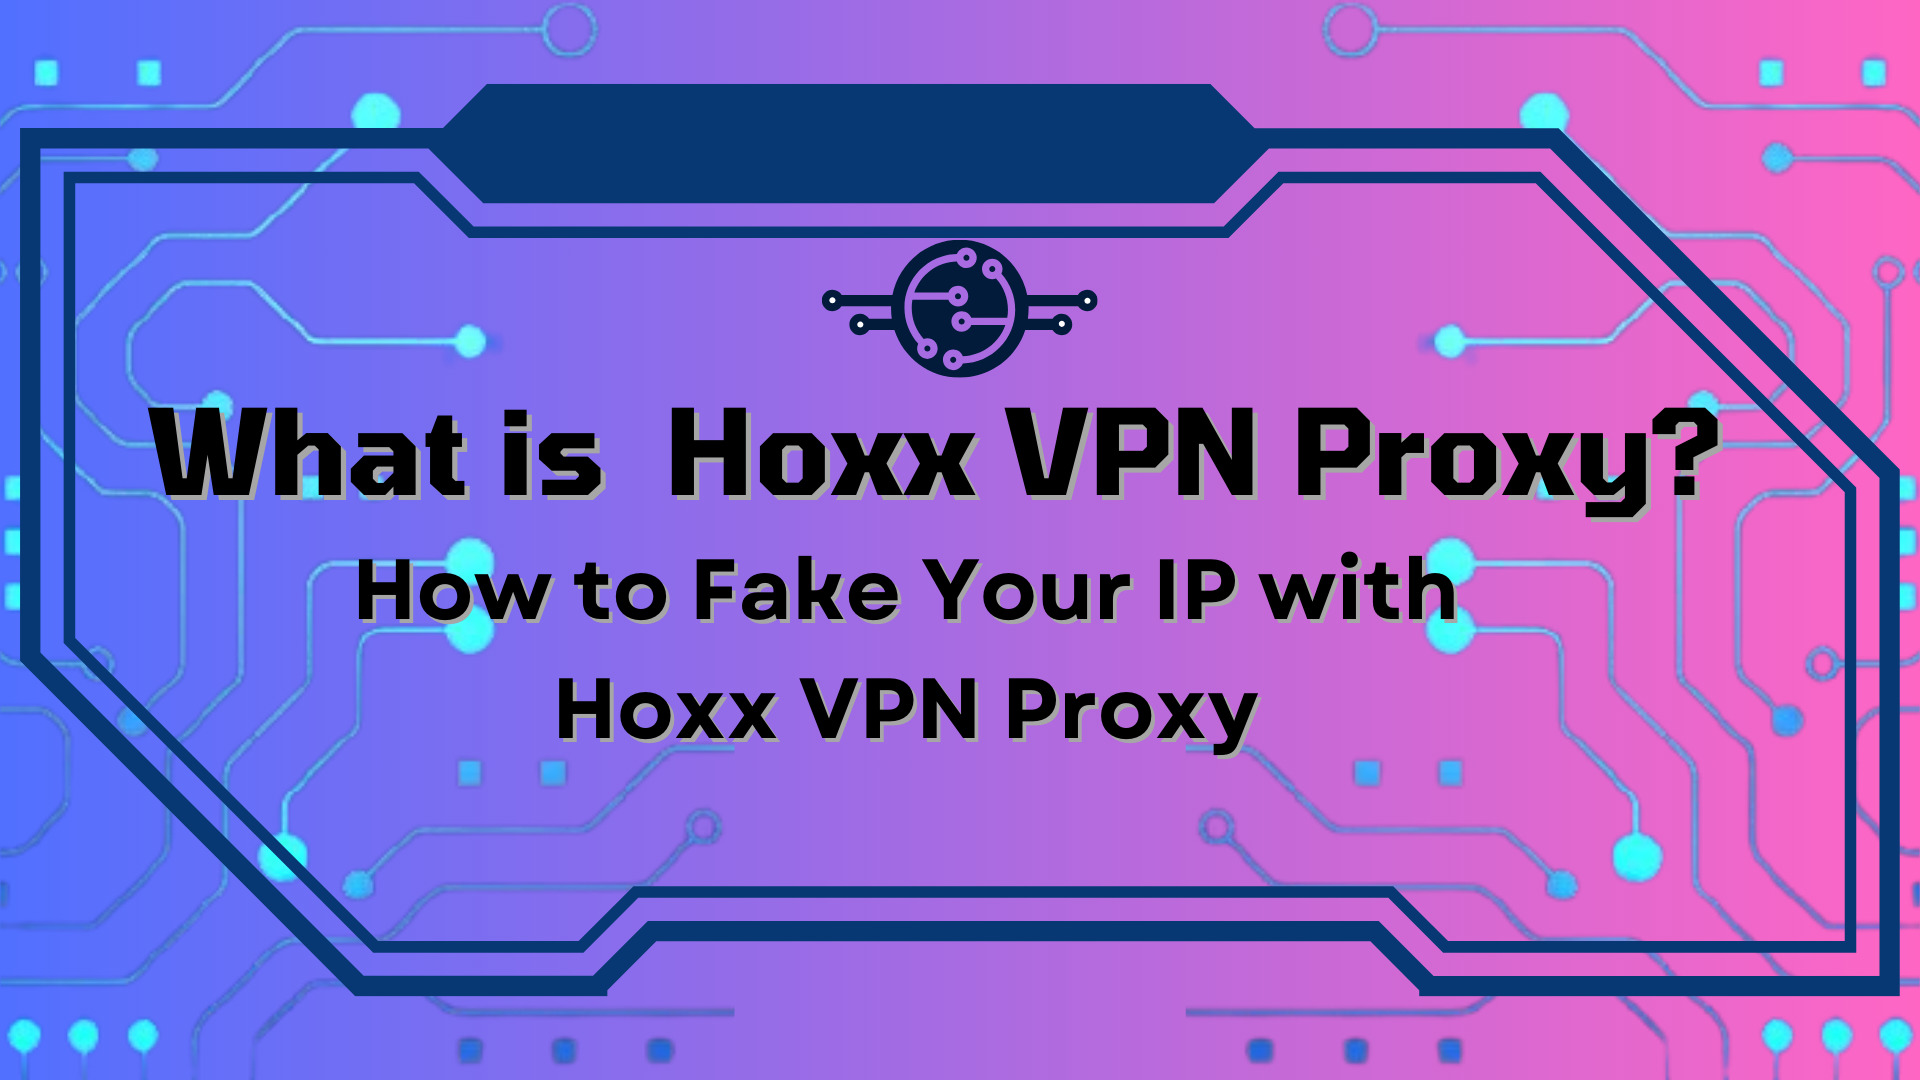 What is Hoxx VPN Proxy? How to Fake Your IP with Hoxx VPN Proxy 2023